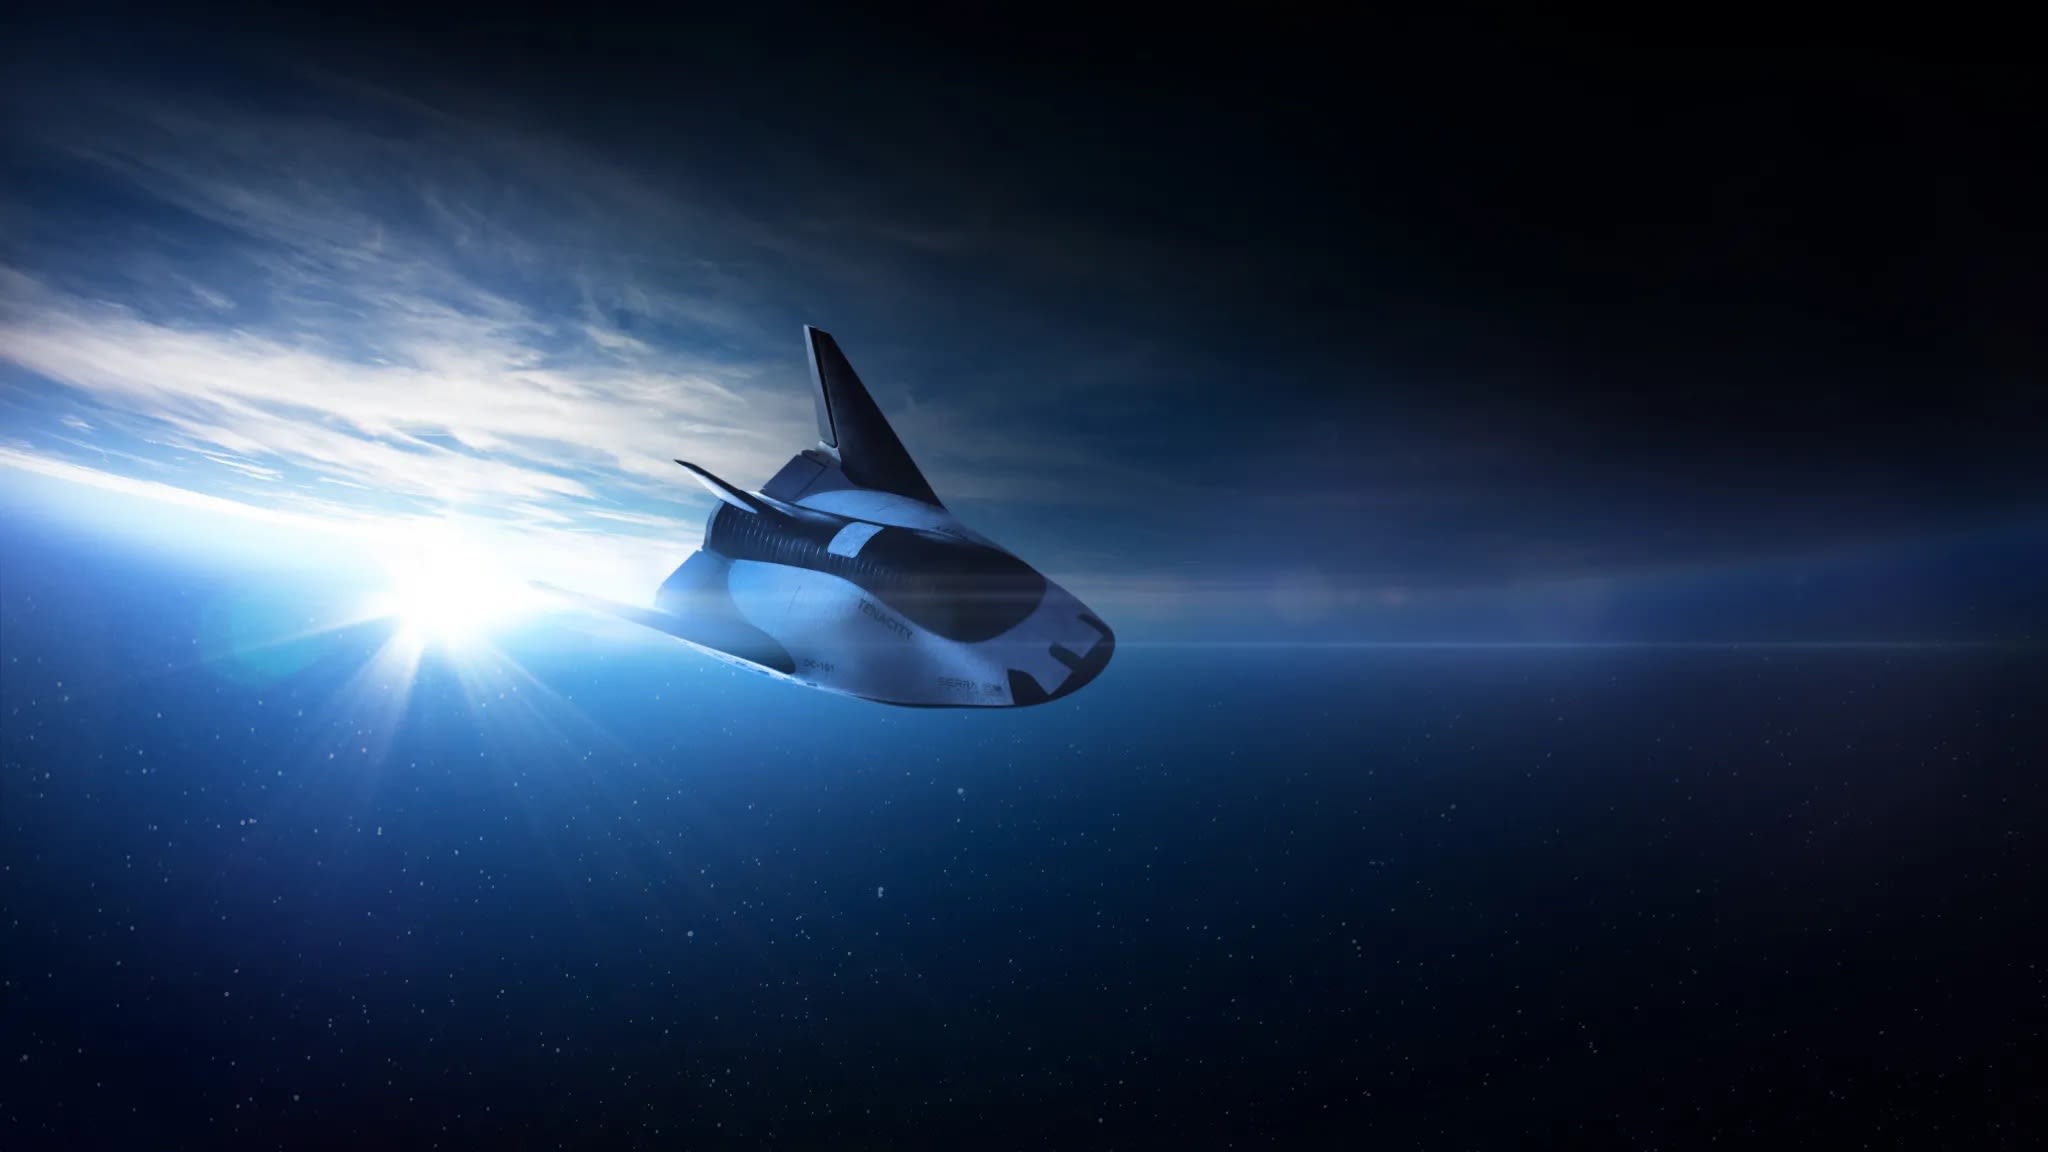 Dream Chaser spaceplane completes tests at NASA’s Neil Armstrong facility